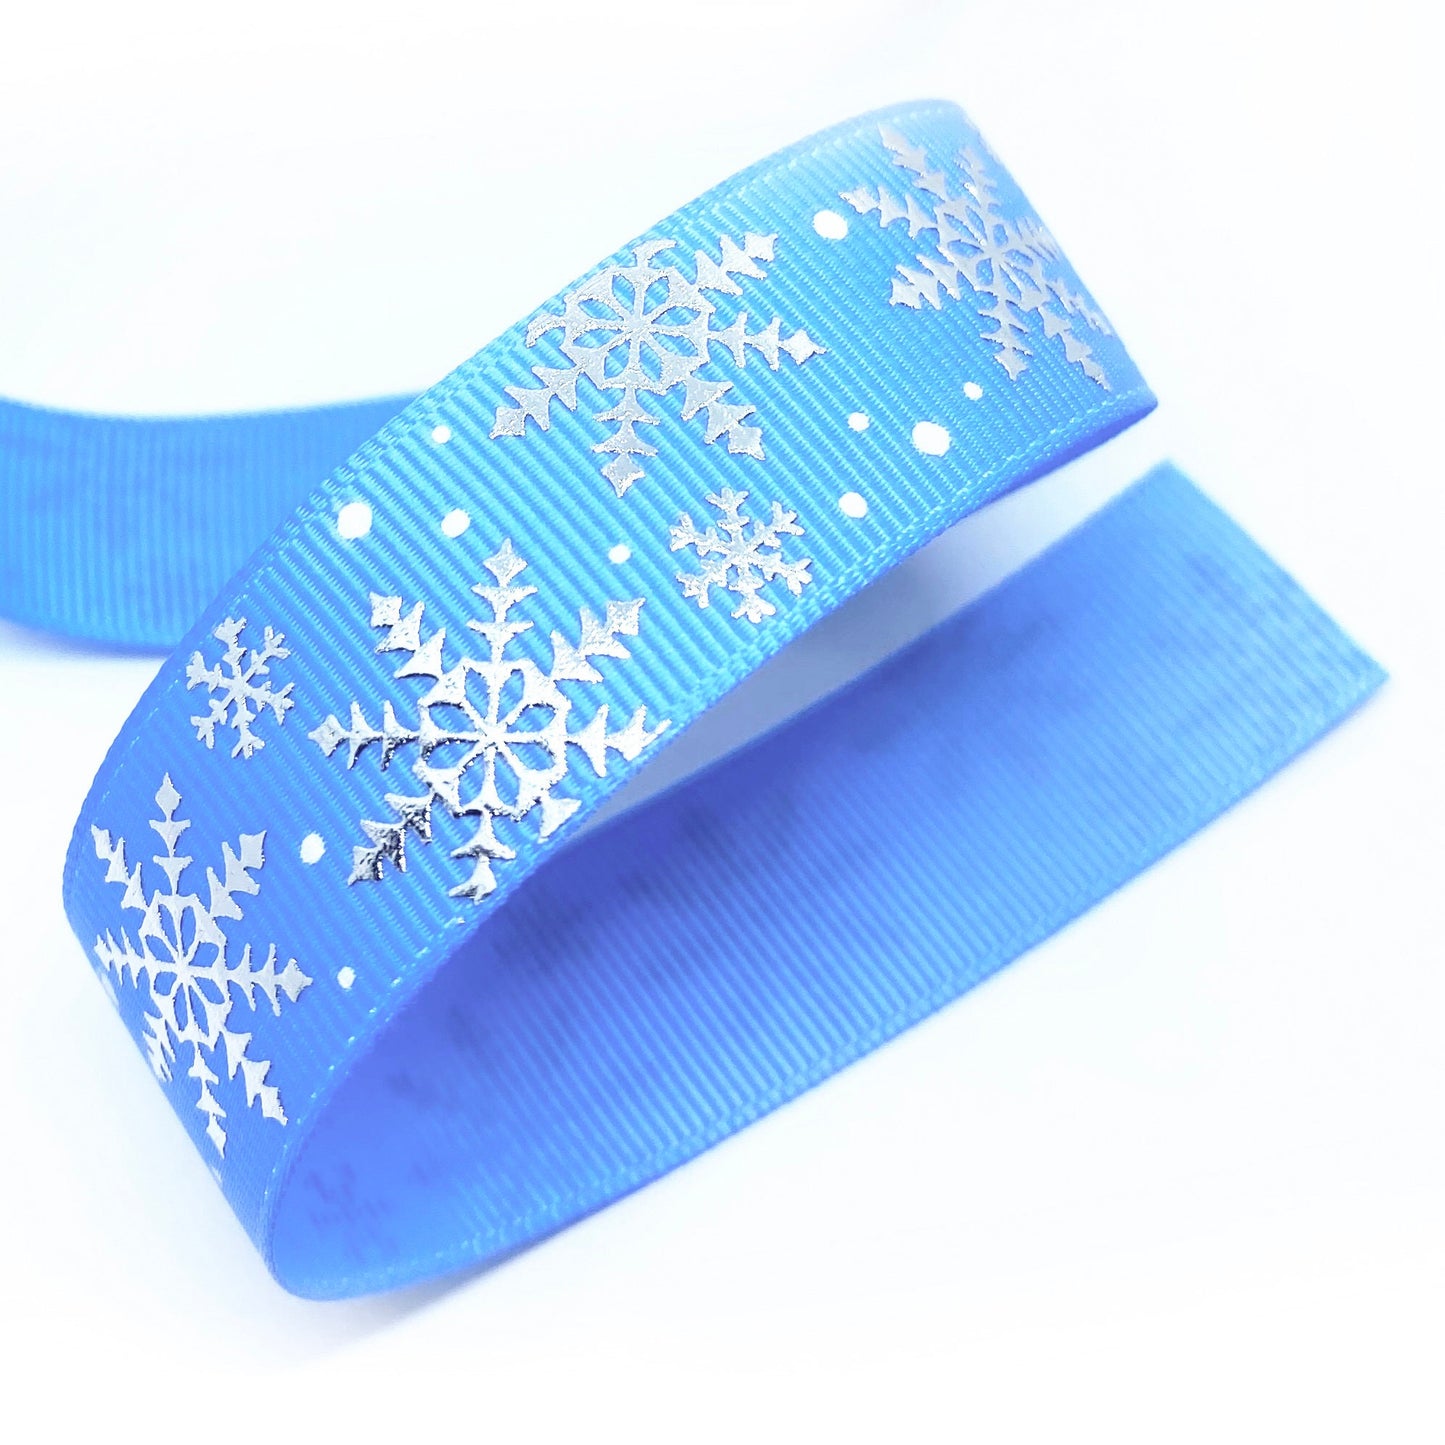 Snowflake Grosgrain Ribbon Blue or White Silver Metallic 16mm or 22m | Wrapping - SweetpeaStore